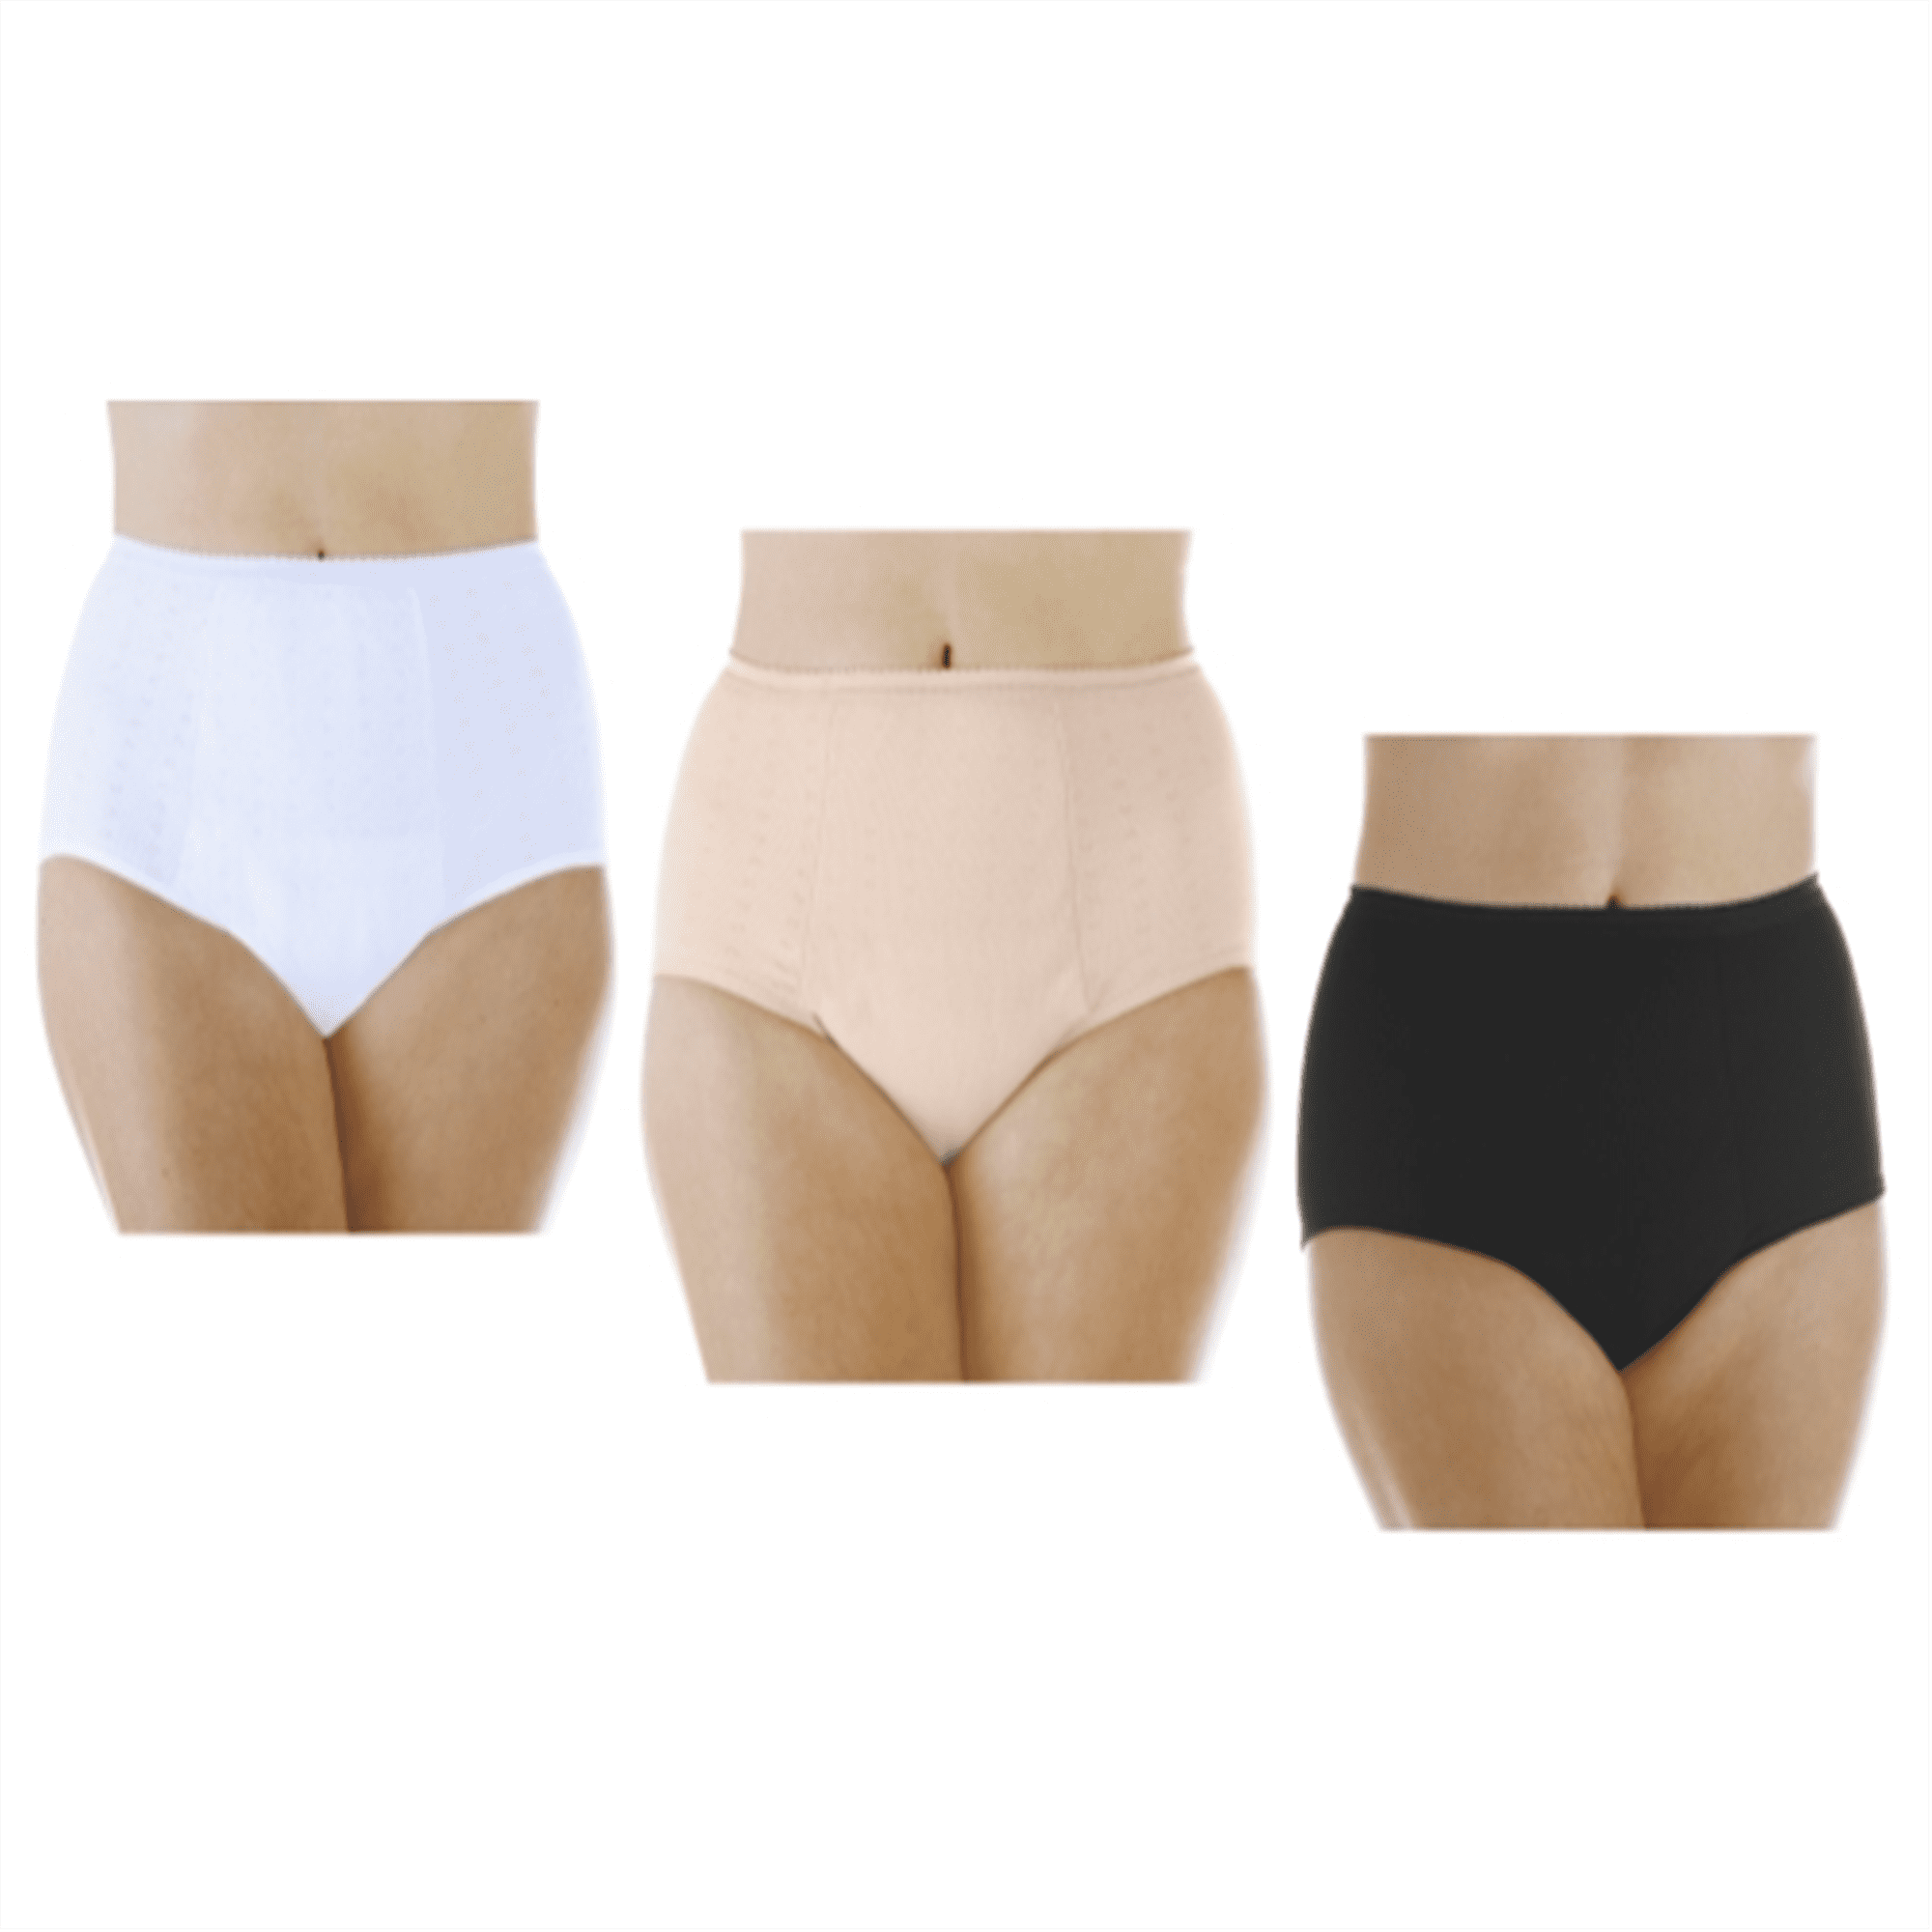 Wearever Women's Incontinence Underwear Banded Leg Bladder Control Briefs,  Washable Reusable Panties, 3-Pack